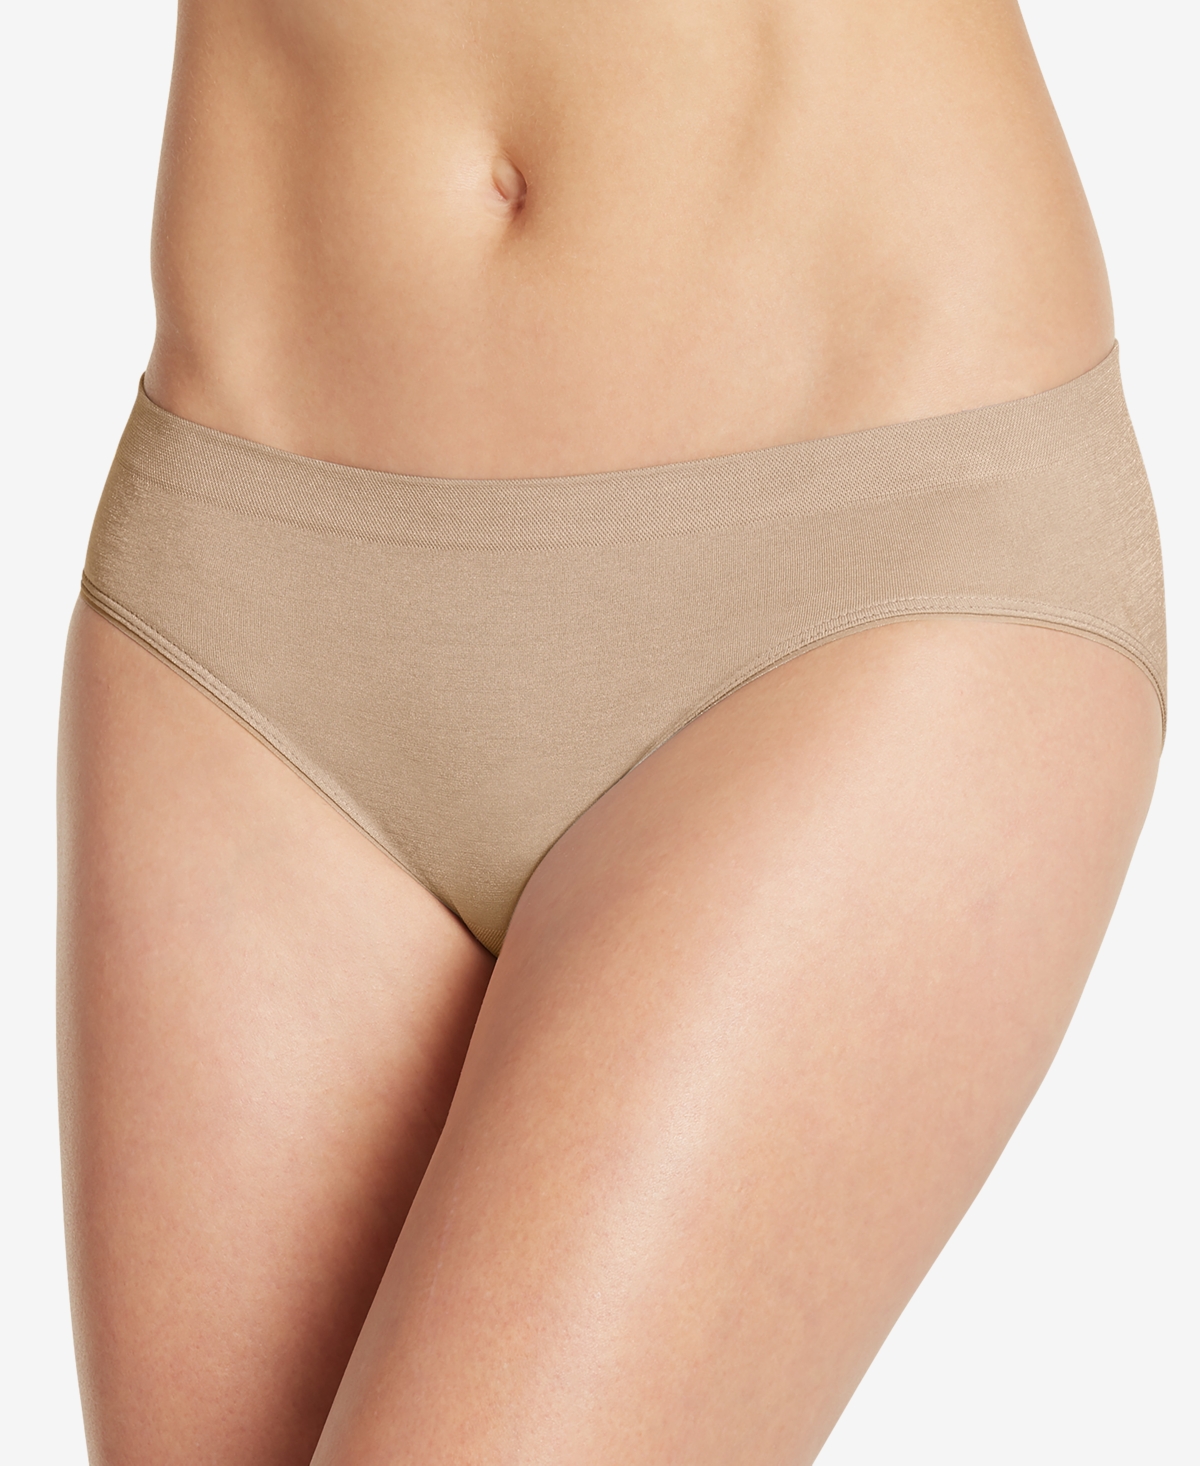 Smooth and Shine Seamfree Heathered Bikini Underwear 2186, available in extended sizes - Just Past Midnight